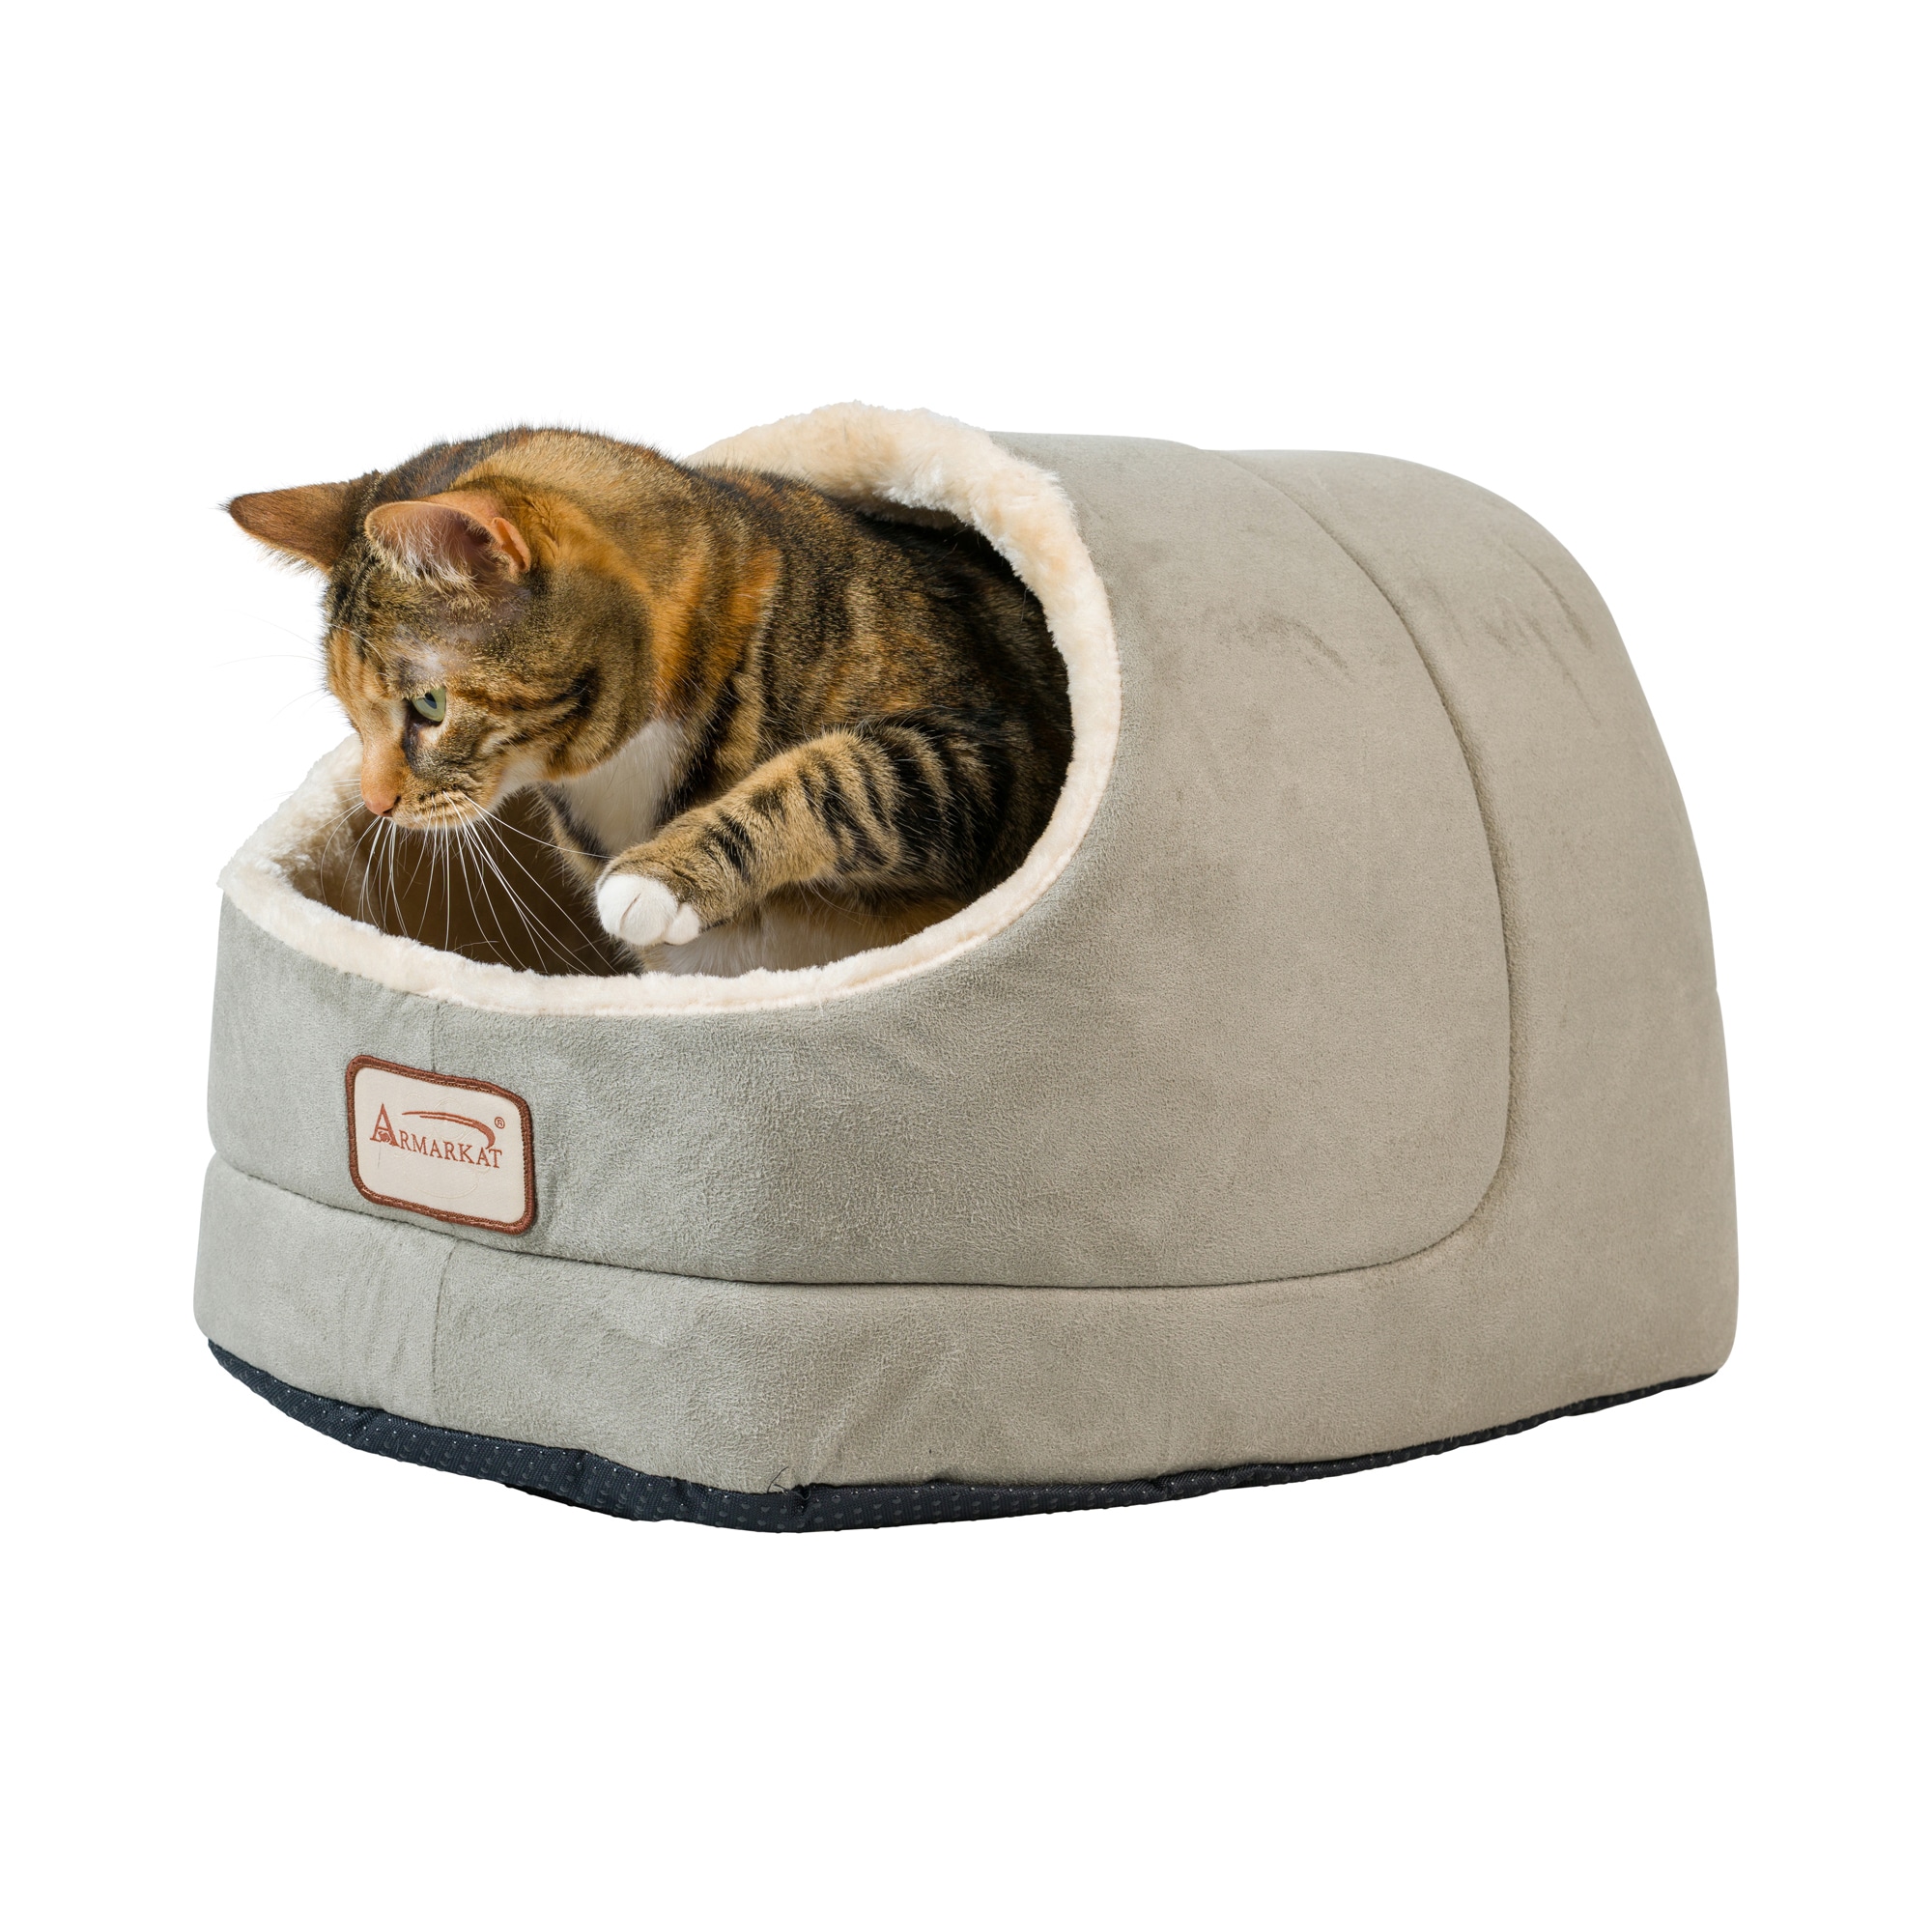 Armarkat Sage Green/Beige Suede Enclosed Cat Bed (Small)